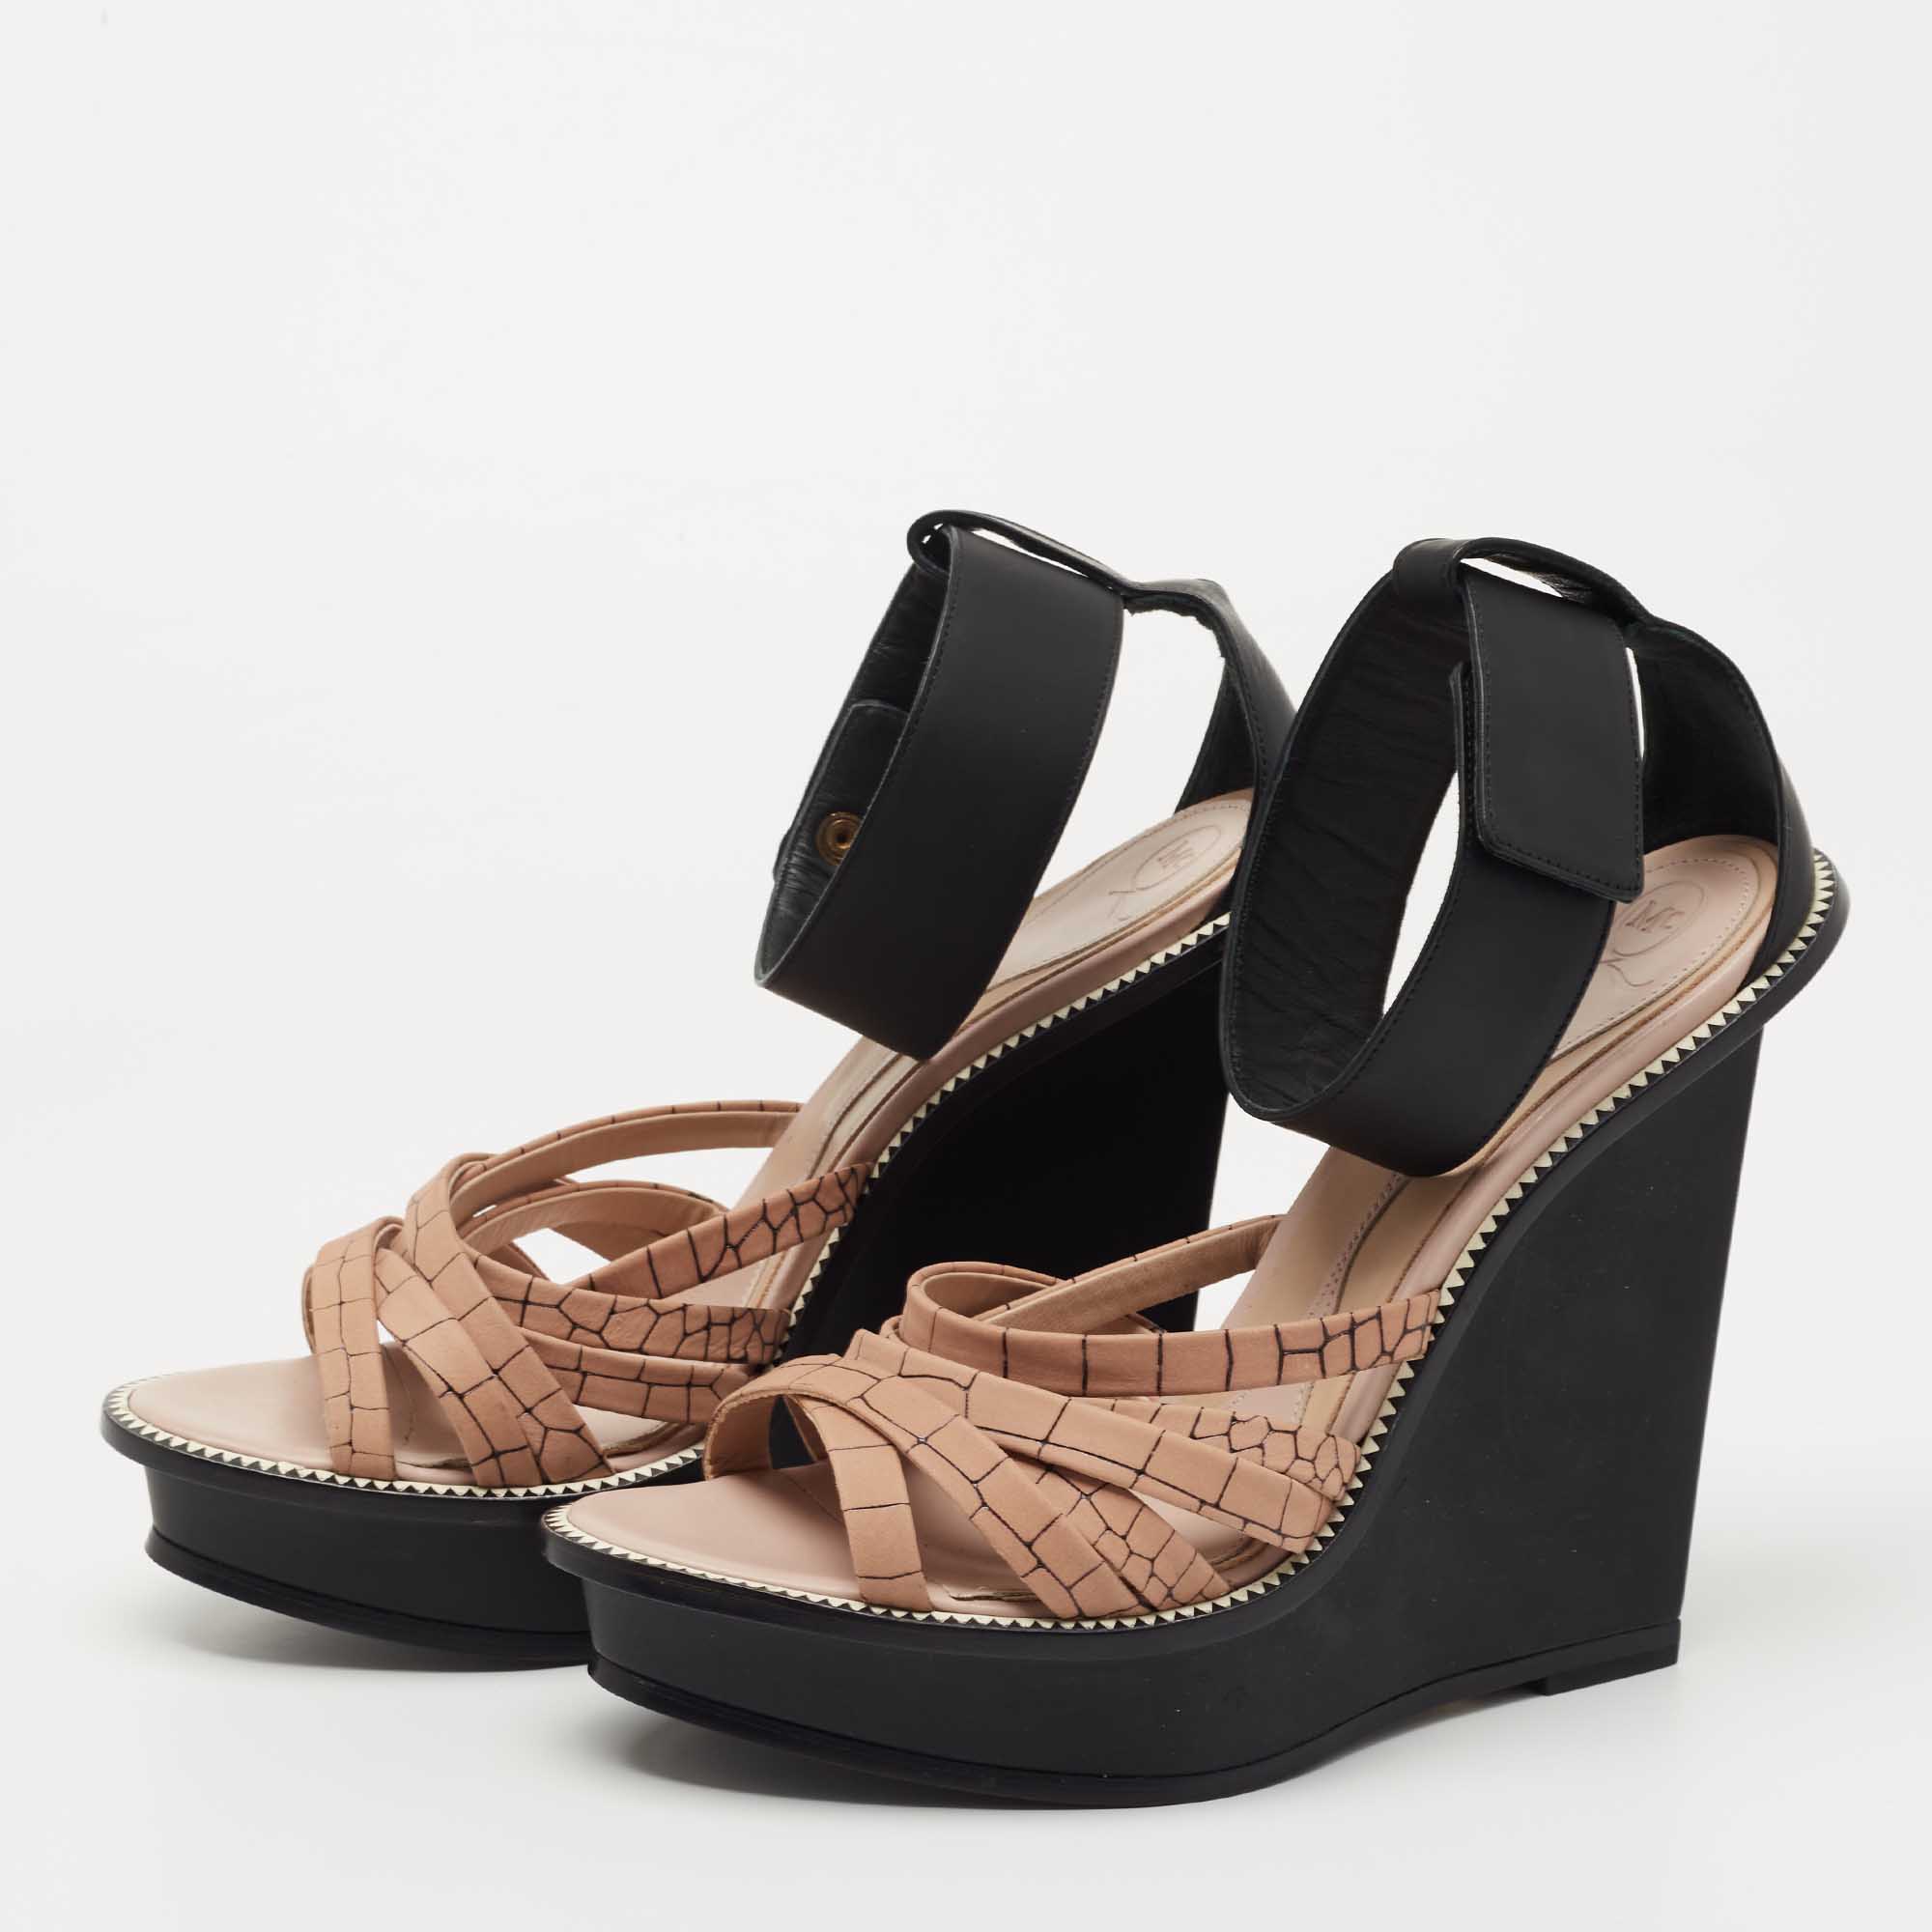 

McQ by Alexander McQueen Black/Light Pink Leather Wedge Ankle Strap Sandals Size